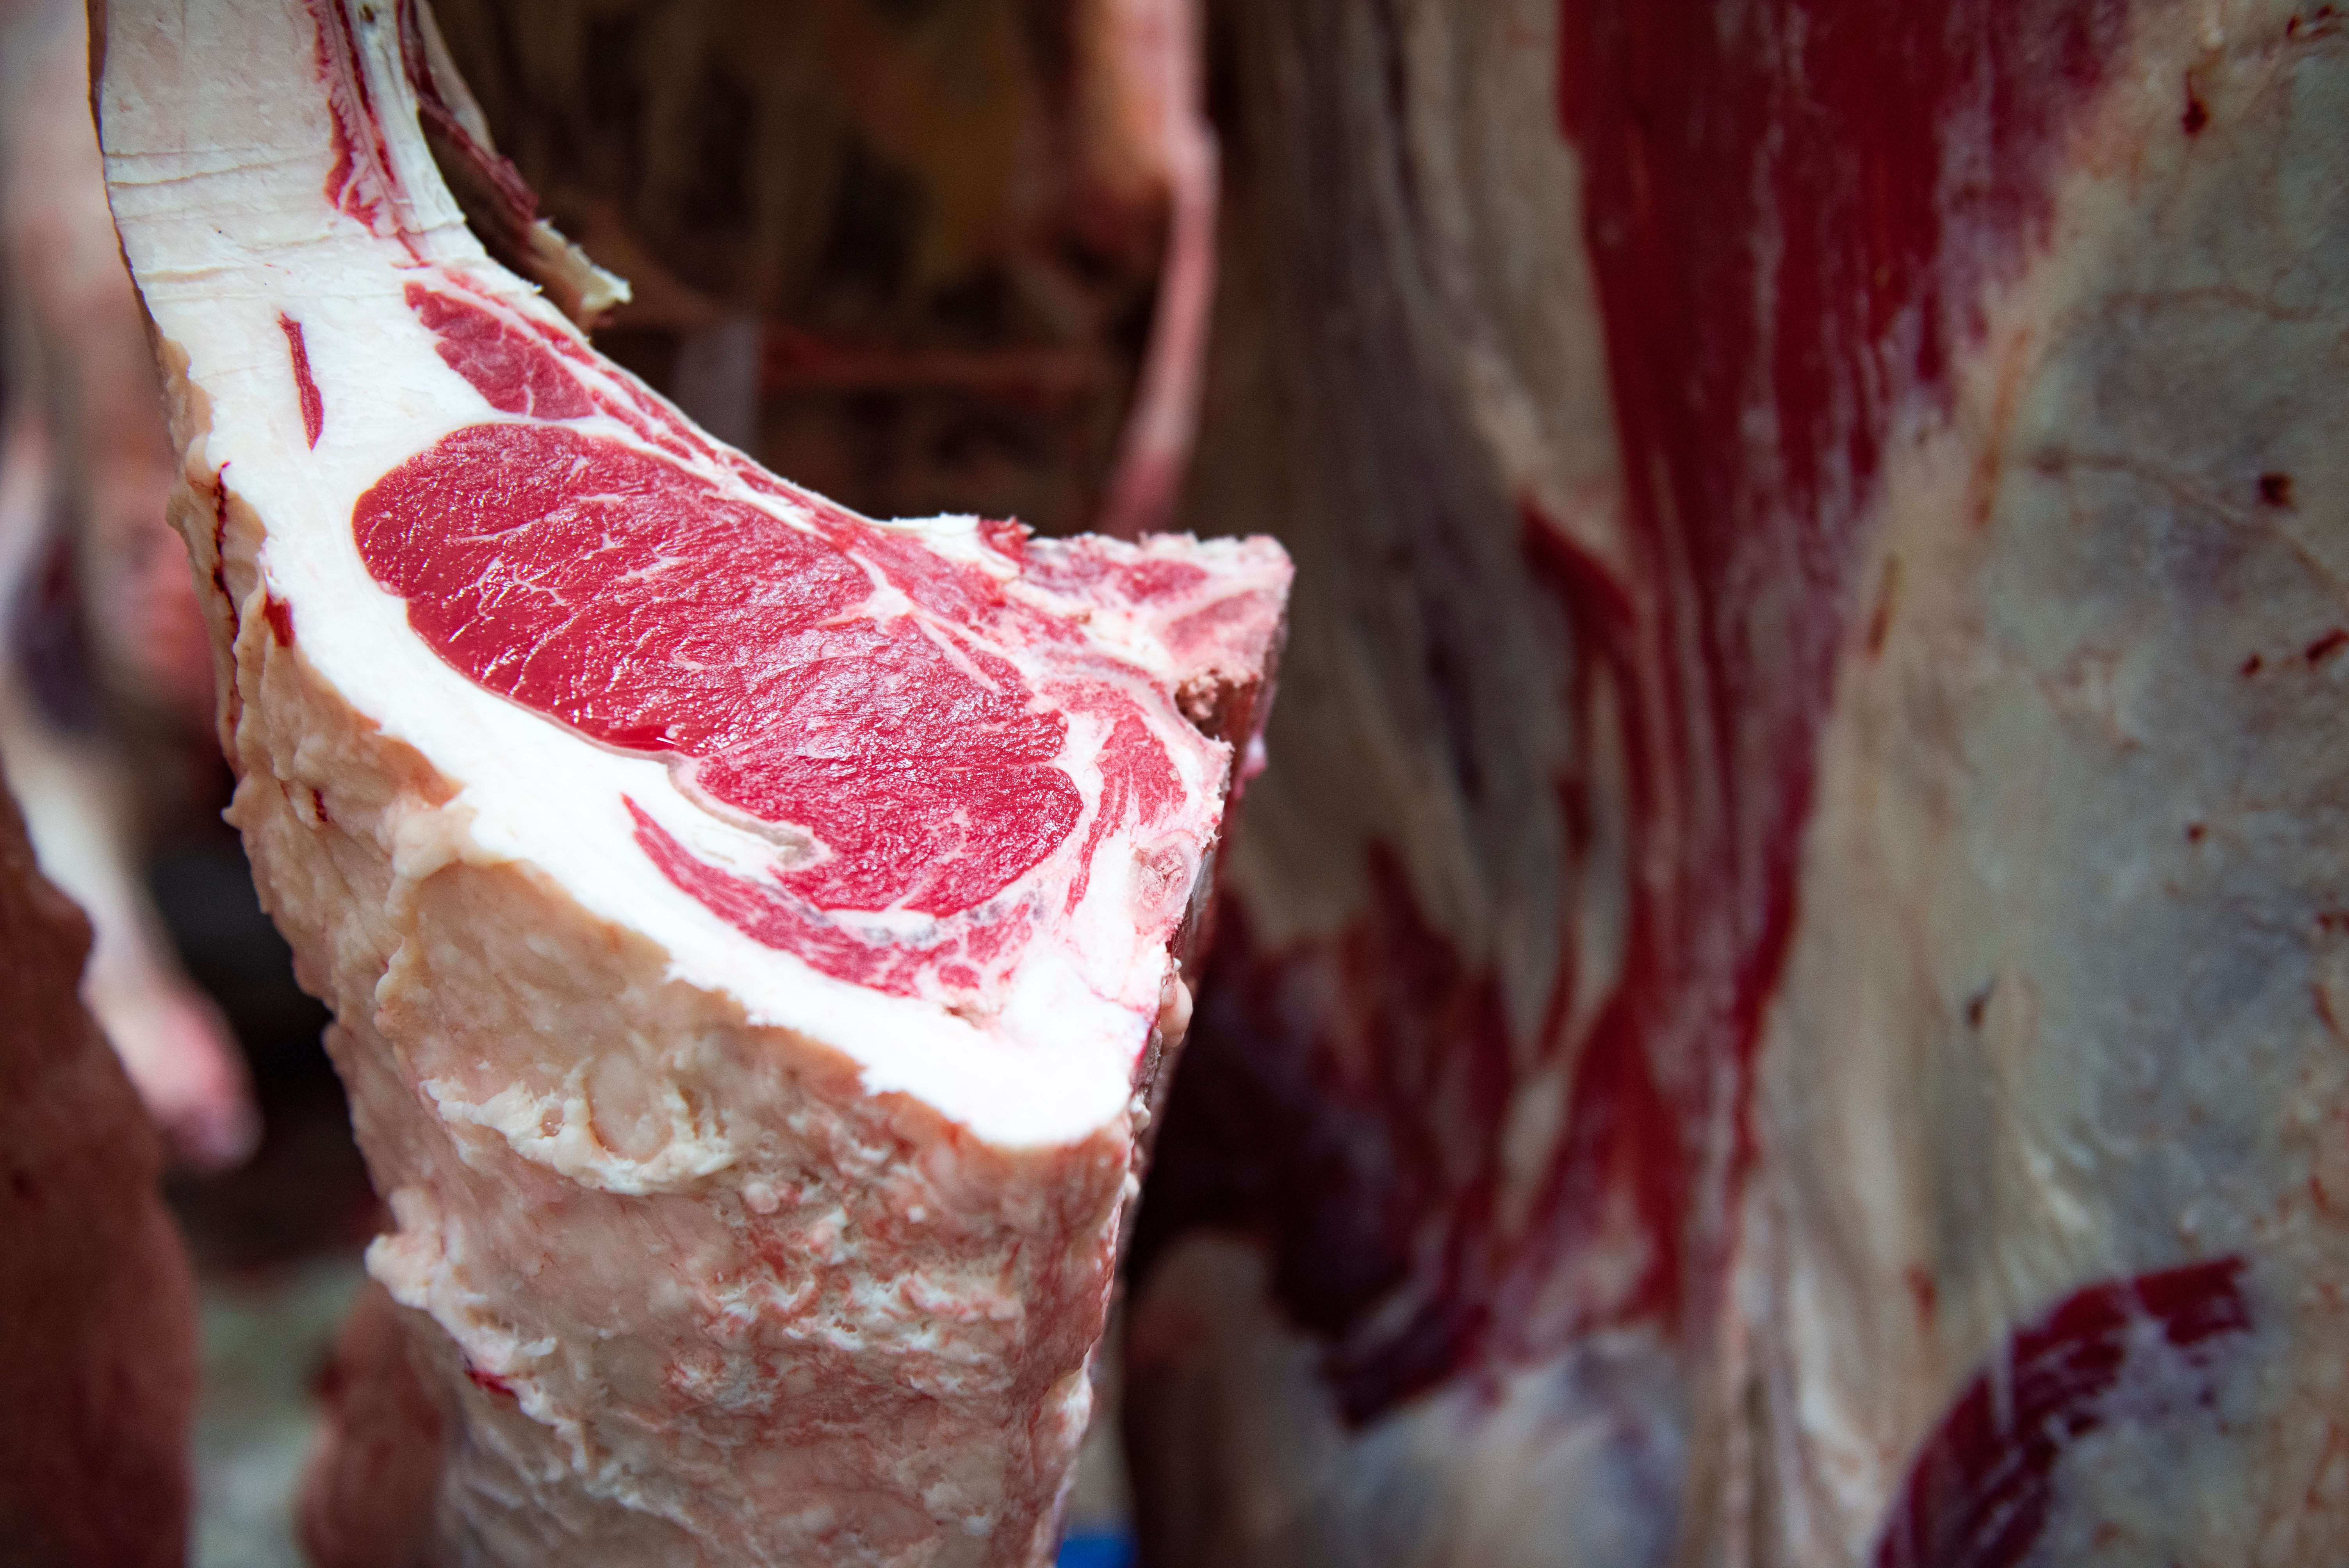 Resource for Training Meat Judging Teams: Practice the New Quality Grading Standards